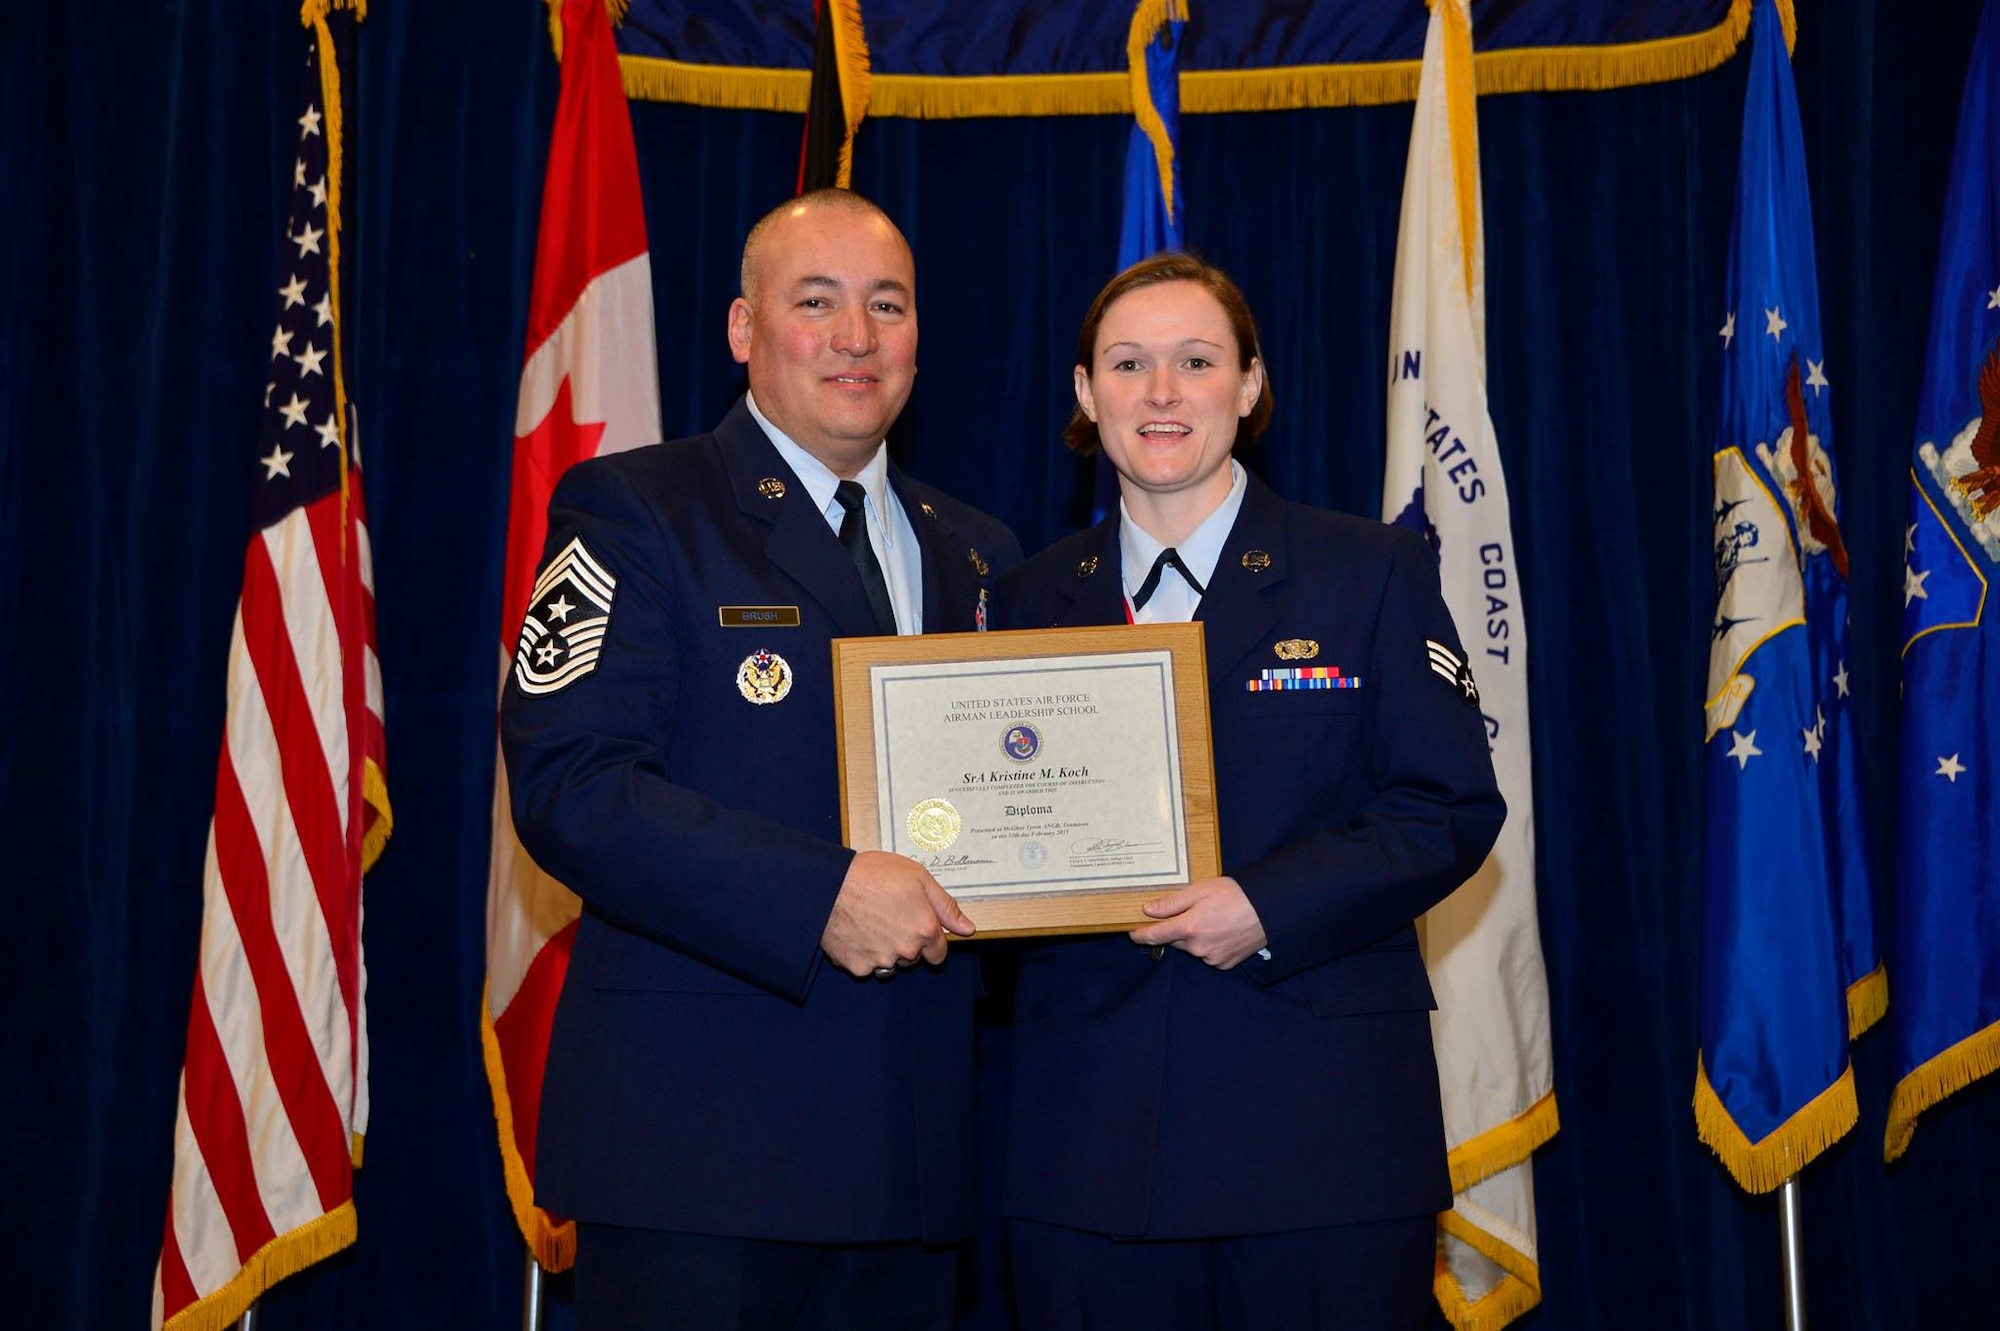 U.S. Air Force Chief Master Sgt. Mitchell Brush, senior enlisted advisor to the Chief, National Guard Bureau, recognizes Senior Airman Kristine Koch as a distinguished graduate for Airman Leadership School, 15-3. Feb. 12, 2015, at the Paul H. Lankford Enlisted PME Center, I.G. Brown Training and Education Center. (U.S. Air National Guard photo by Senior Master Sgt. Paul Mann/Released)